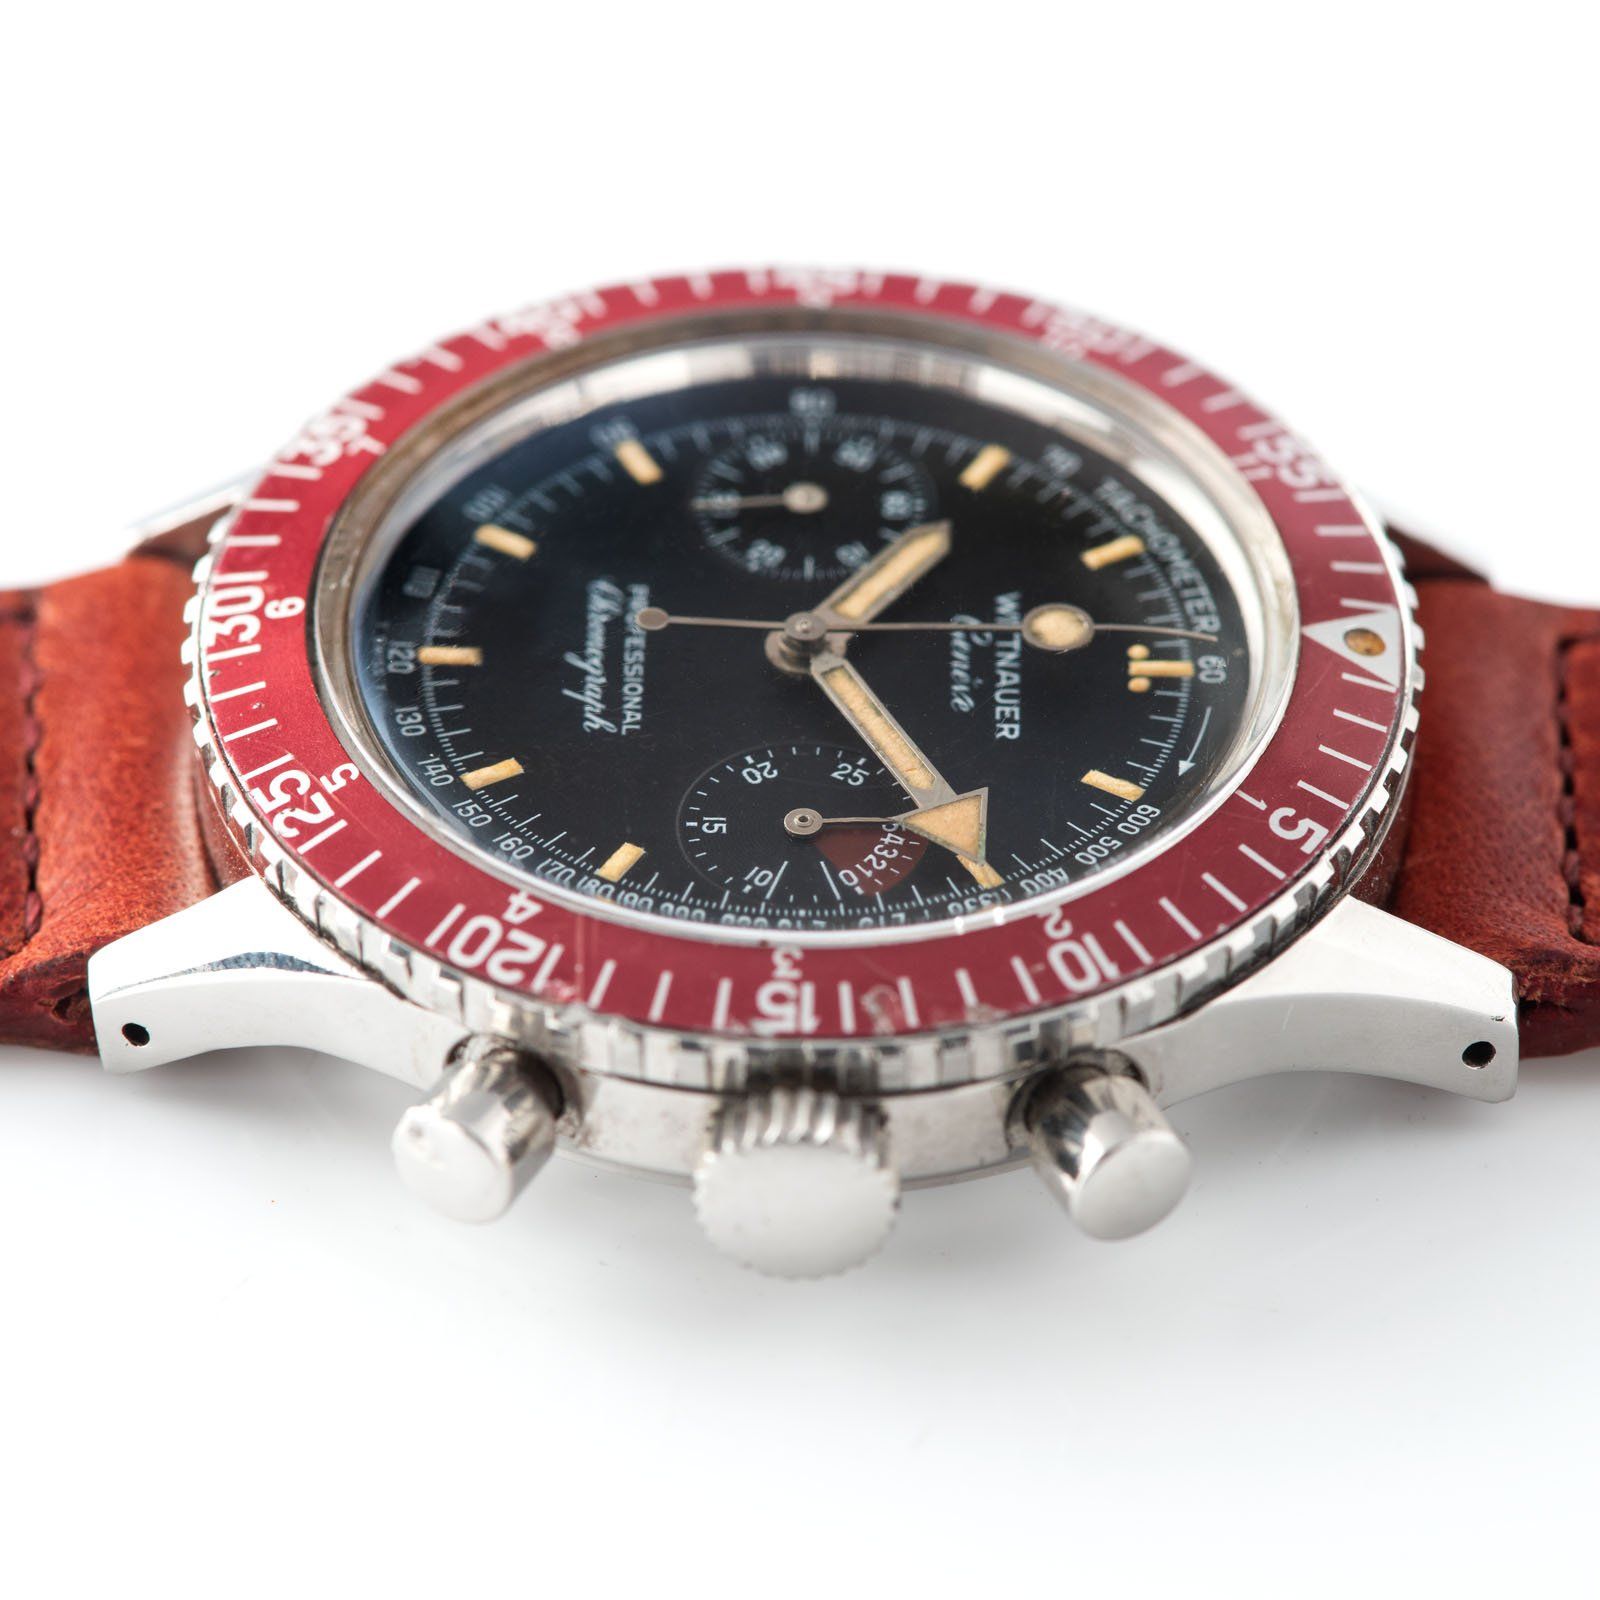 Wittnauer 239T Reference 7004A Steel Chronograph